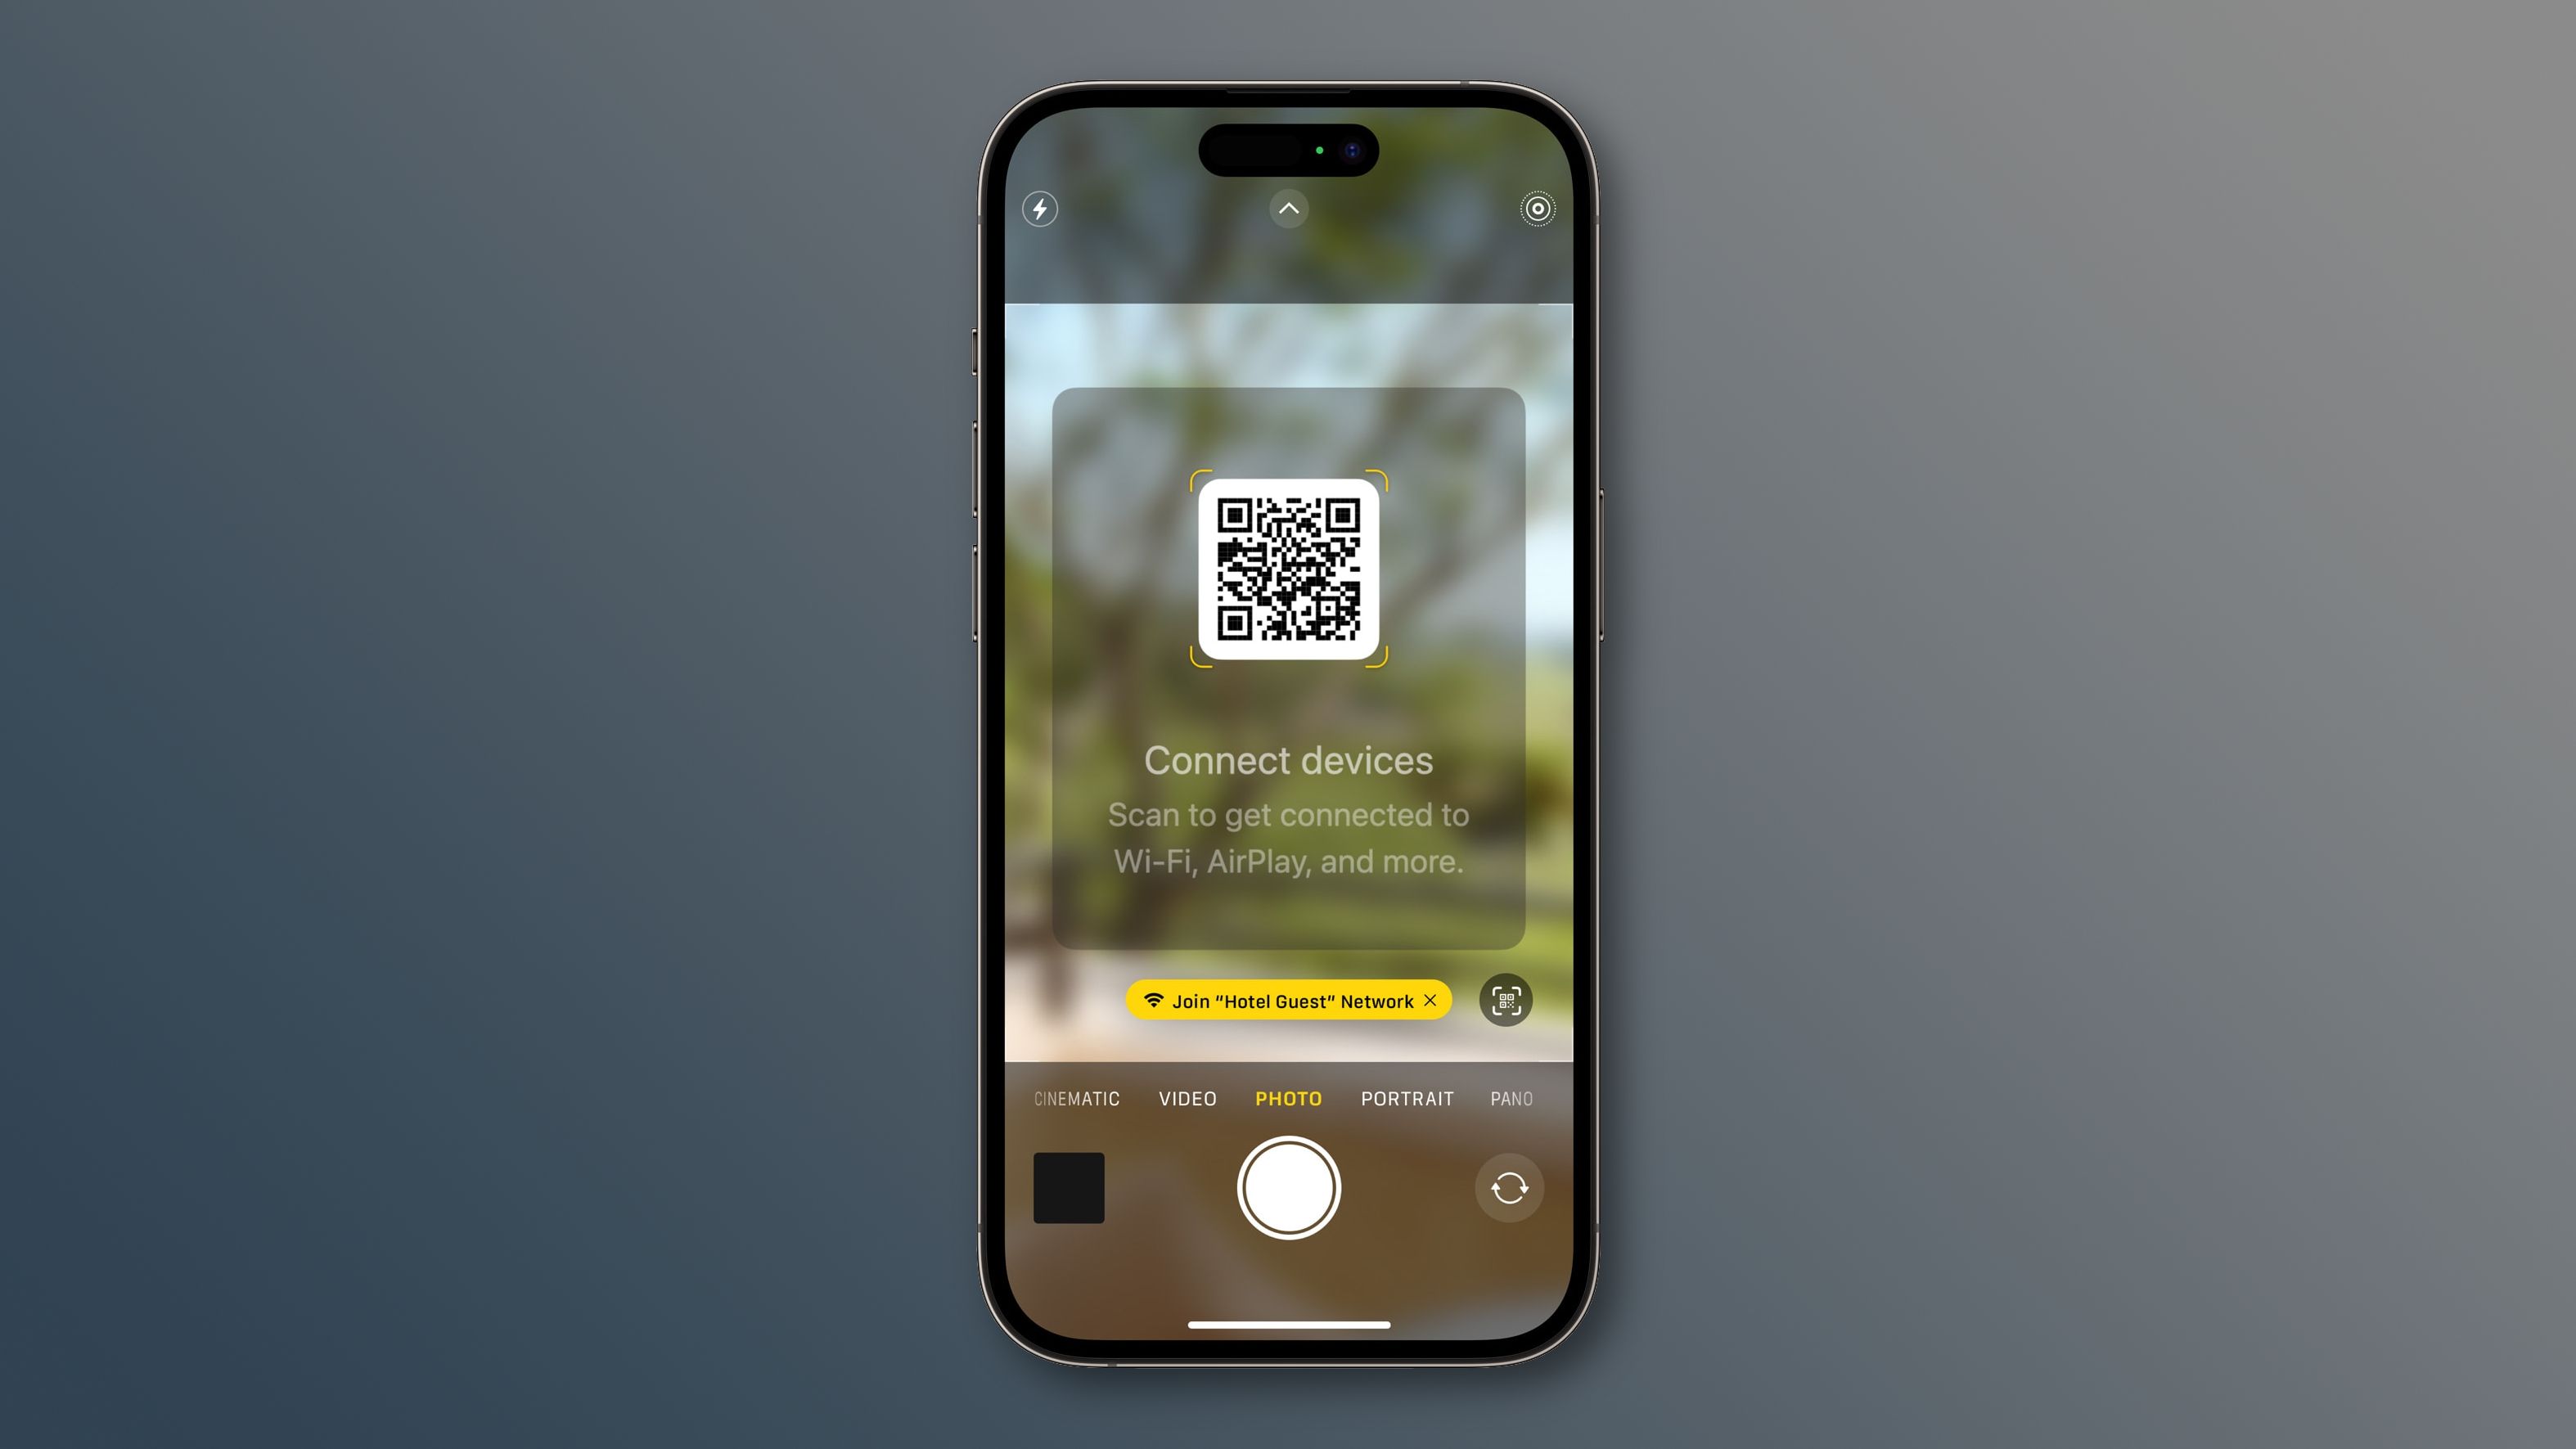 Scanning an AirPlay QR code with the iPhone's Camera app